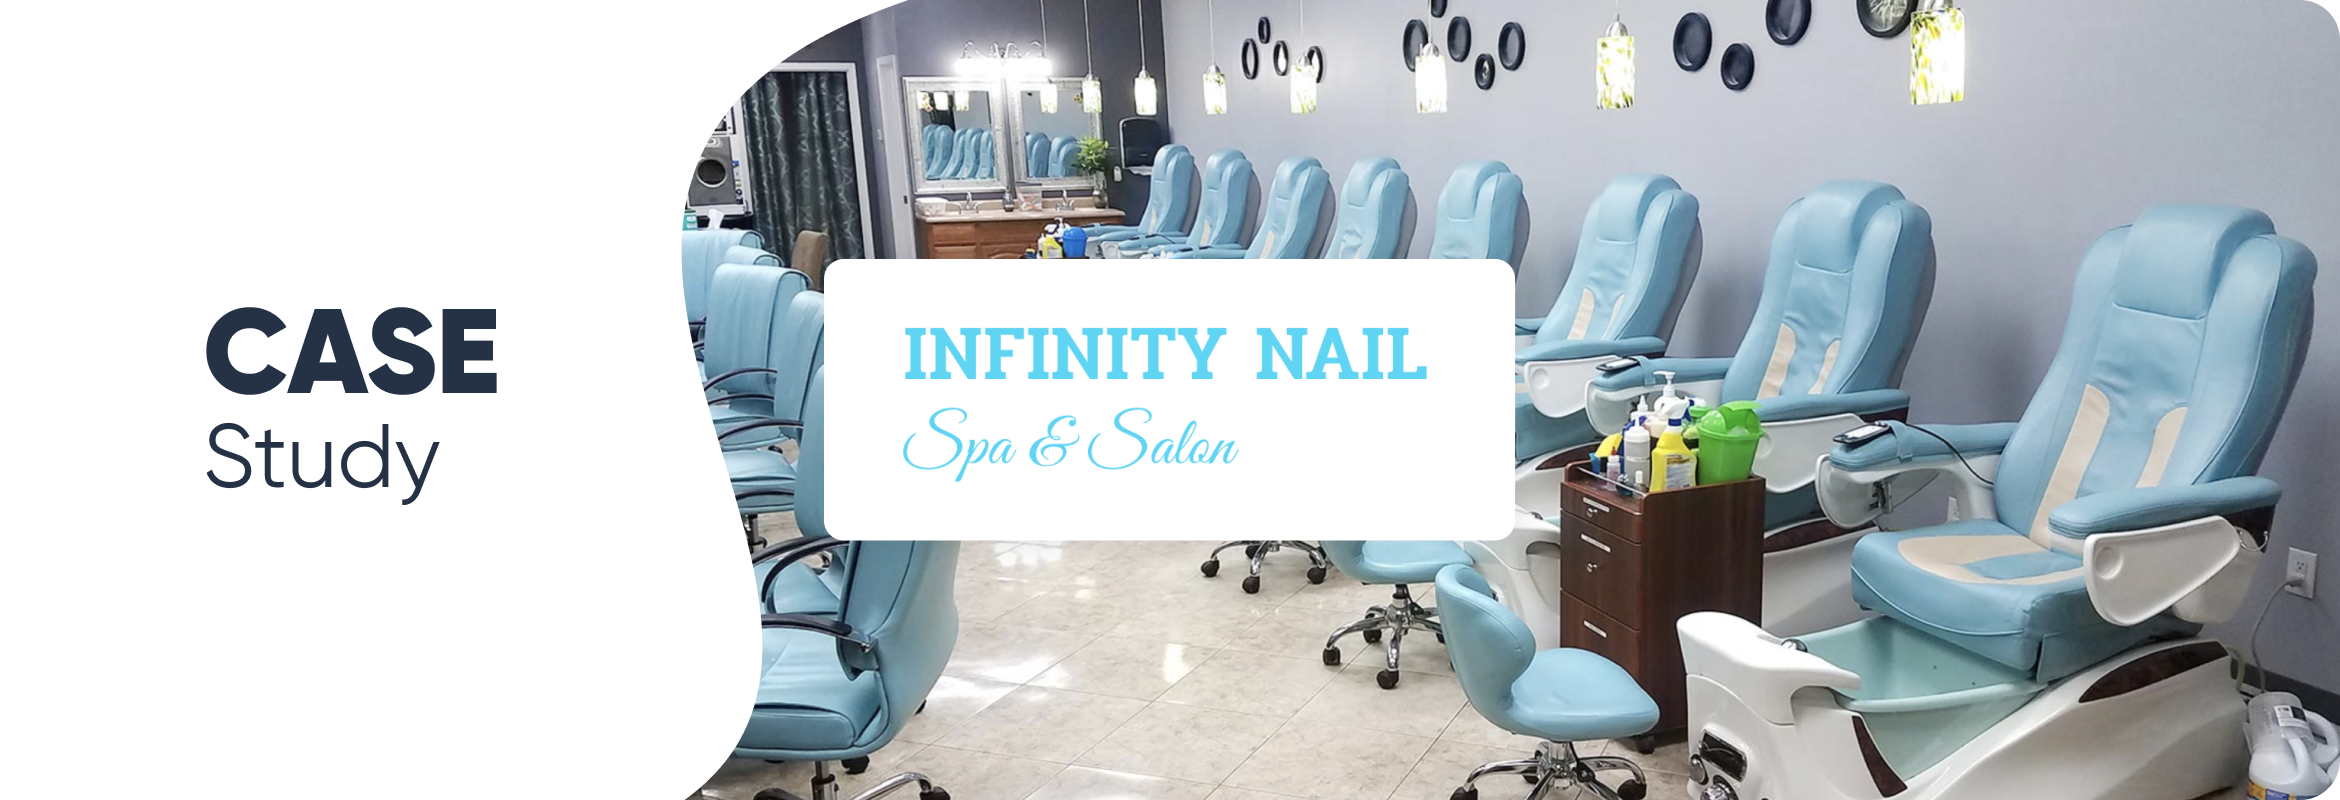 Infinity Nails - a Case Study